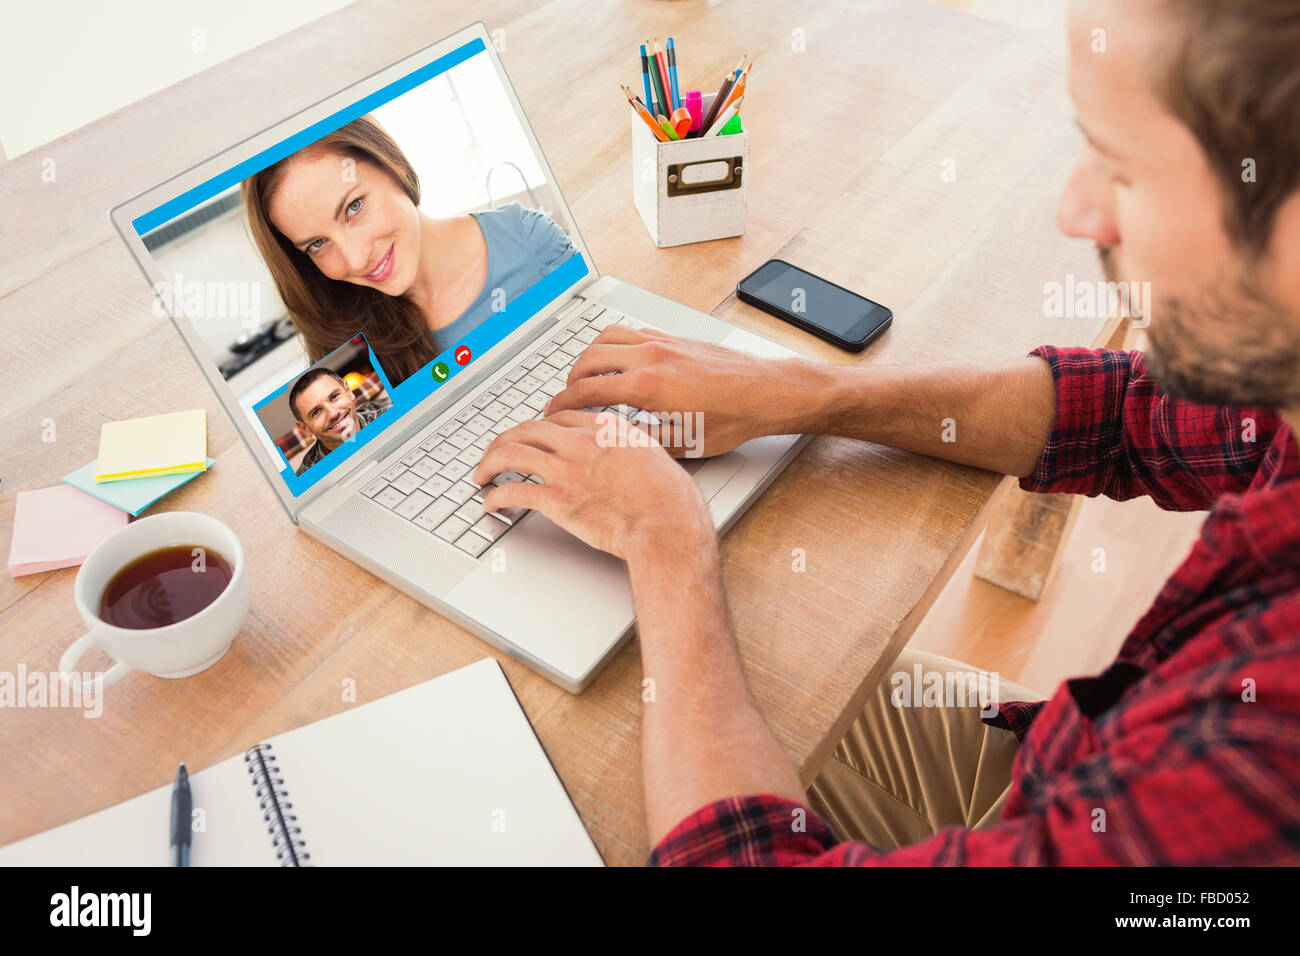 Composite image of creative businessman typing on laptop Stock Photo